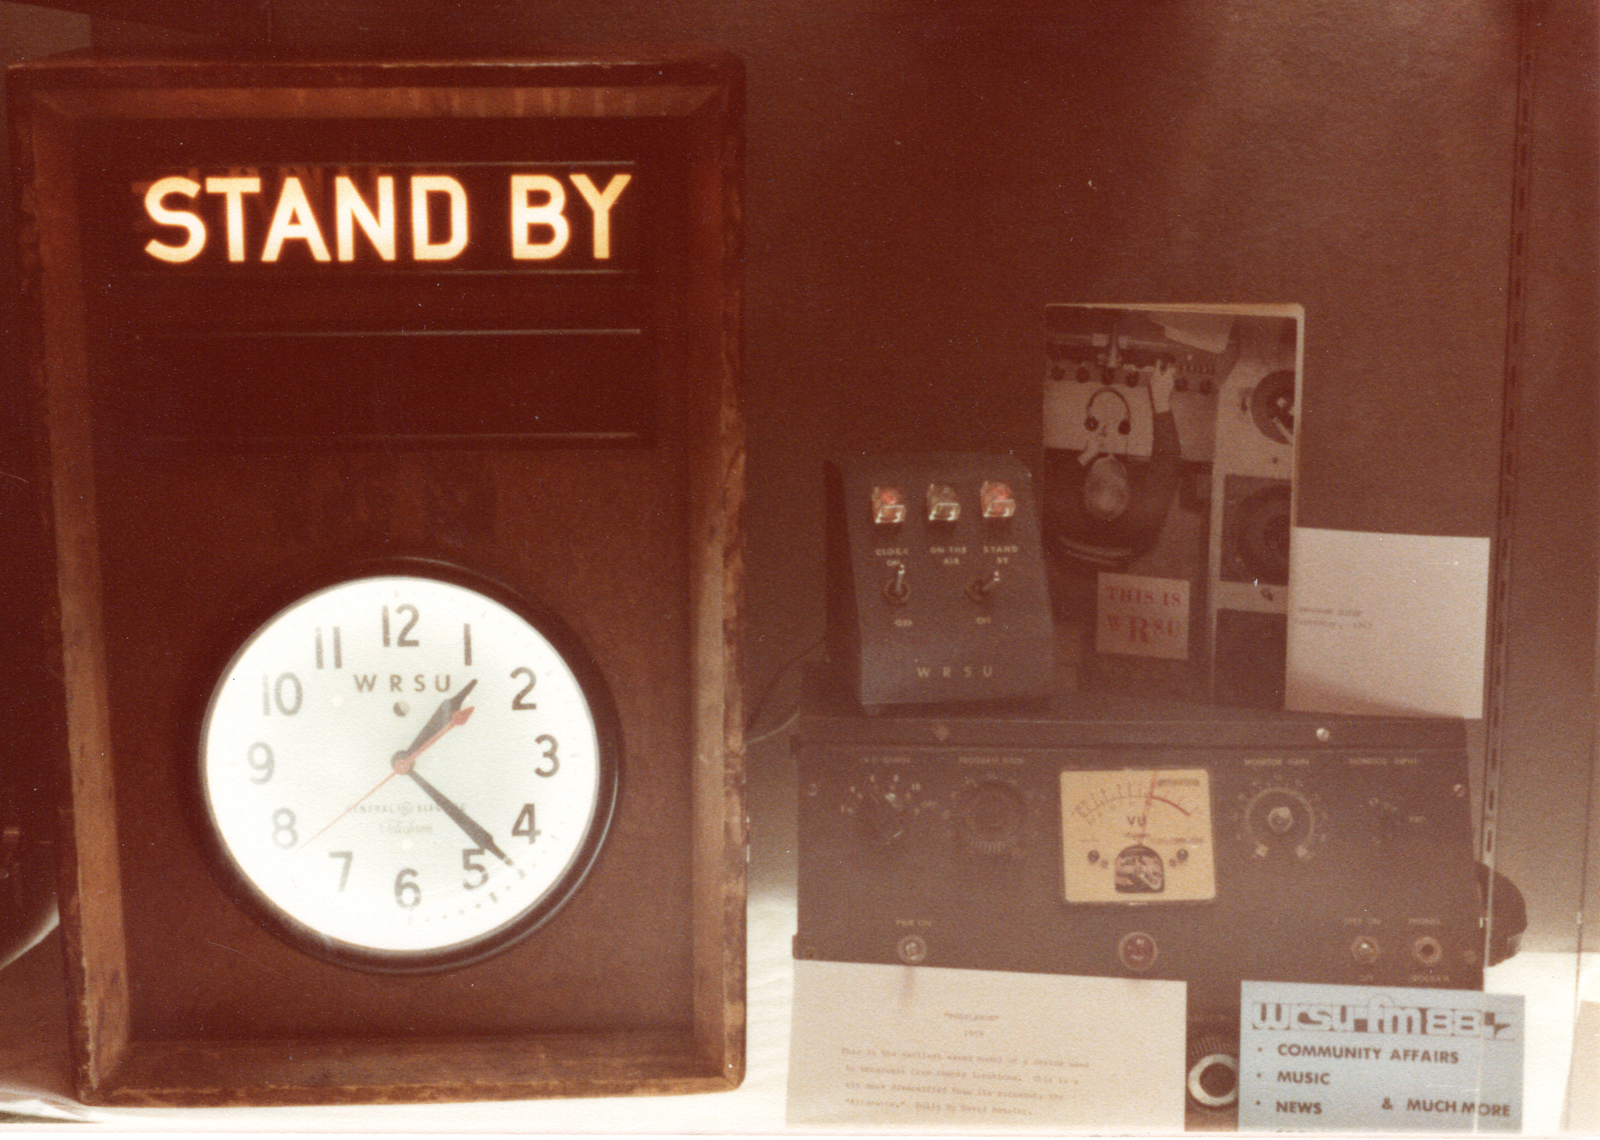 1978 The WRSU Clock - Still existed in 2018 - and the Ressloron Home Brew Mixer from about 1960